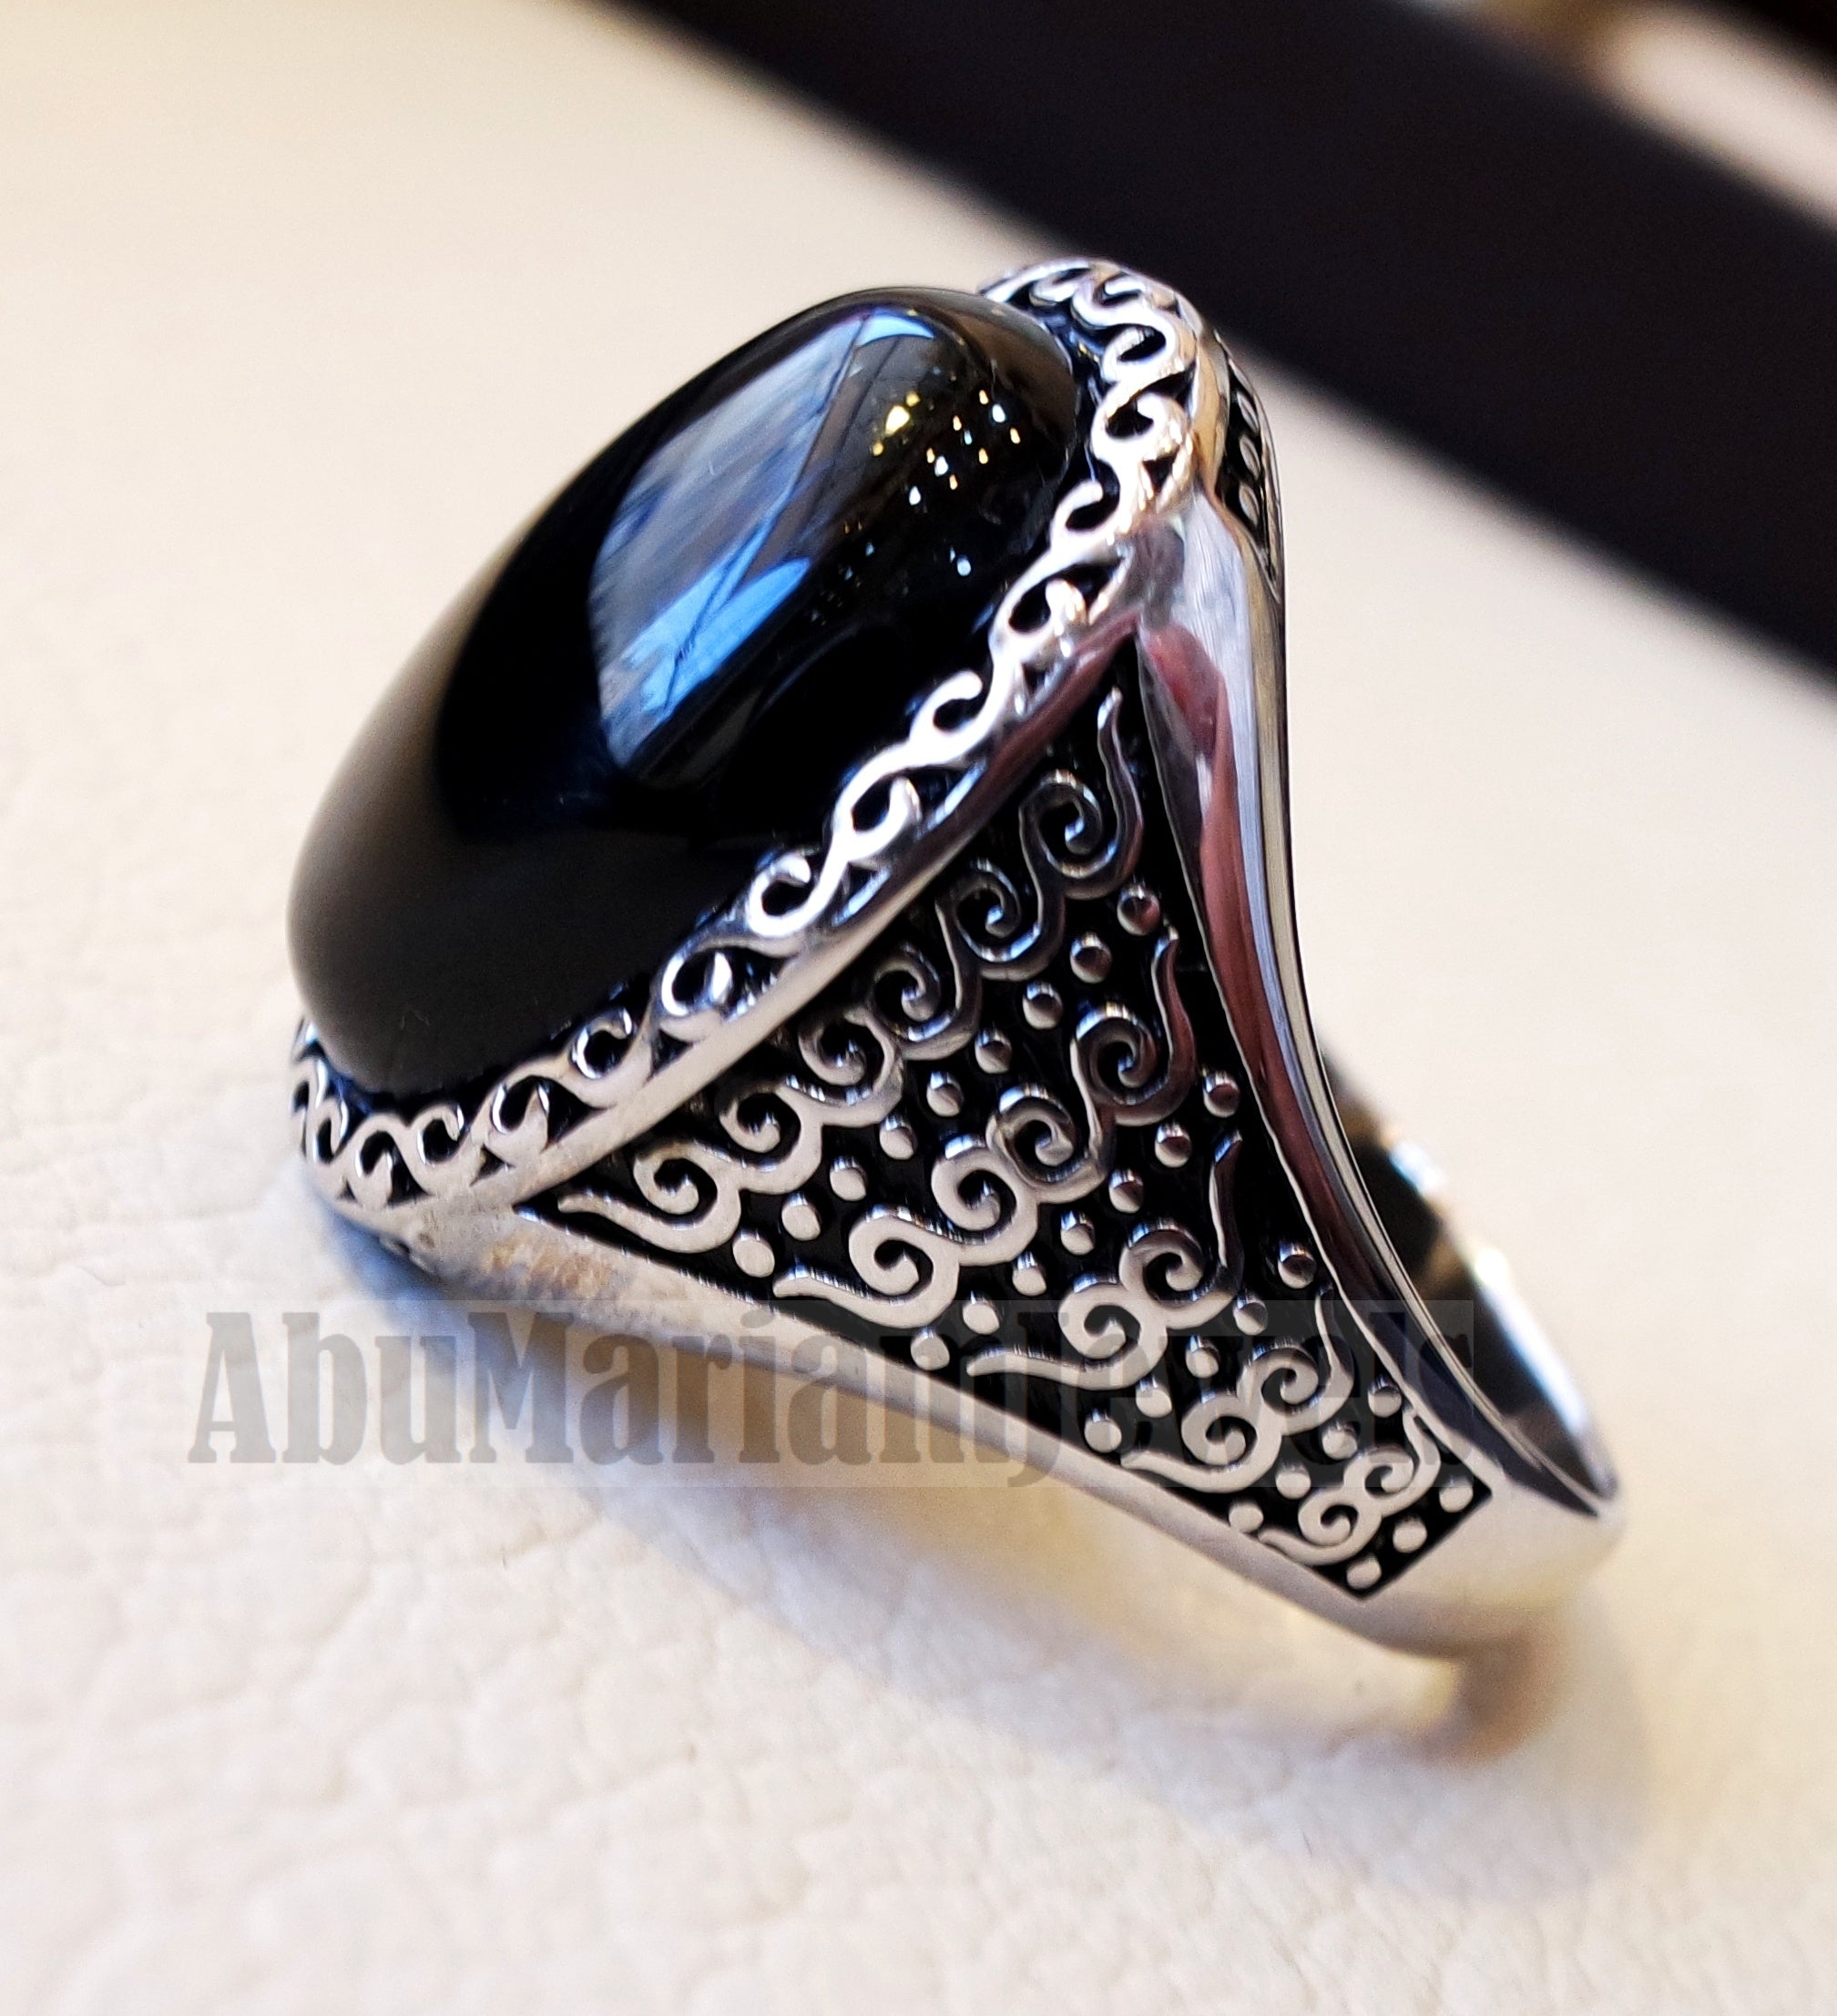 man ring aqeeq natural agate onyx oval stone black big gem sterling silver antique ottoman turkey style fast shipping all sizes men gift